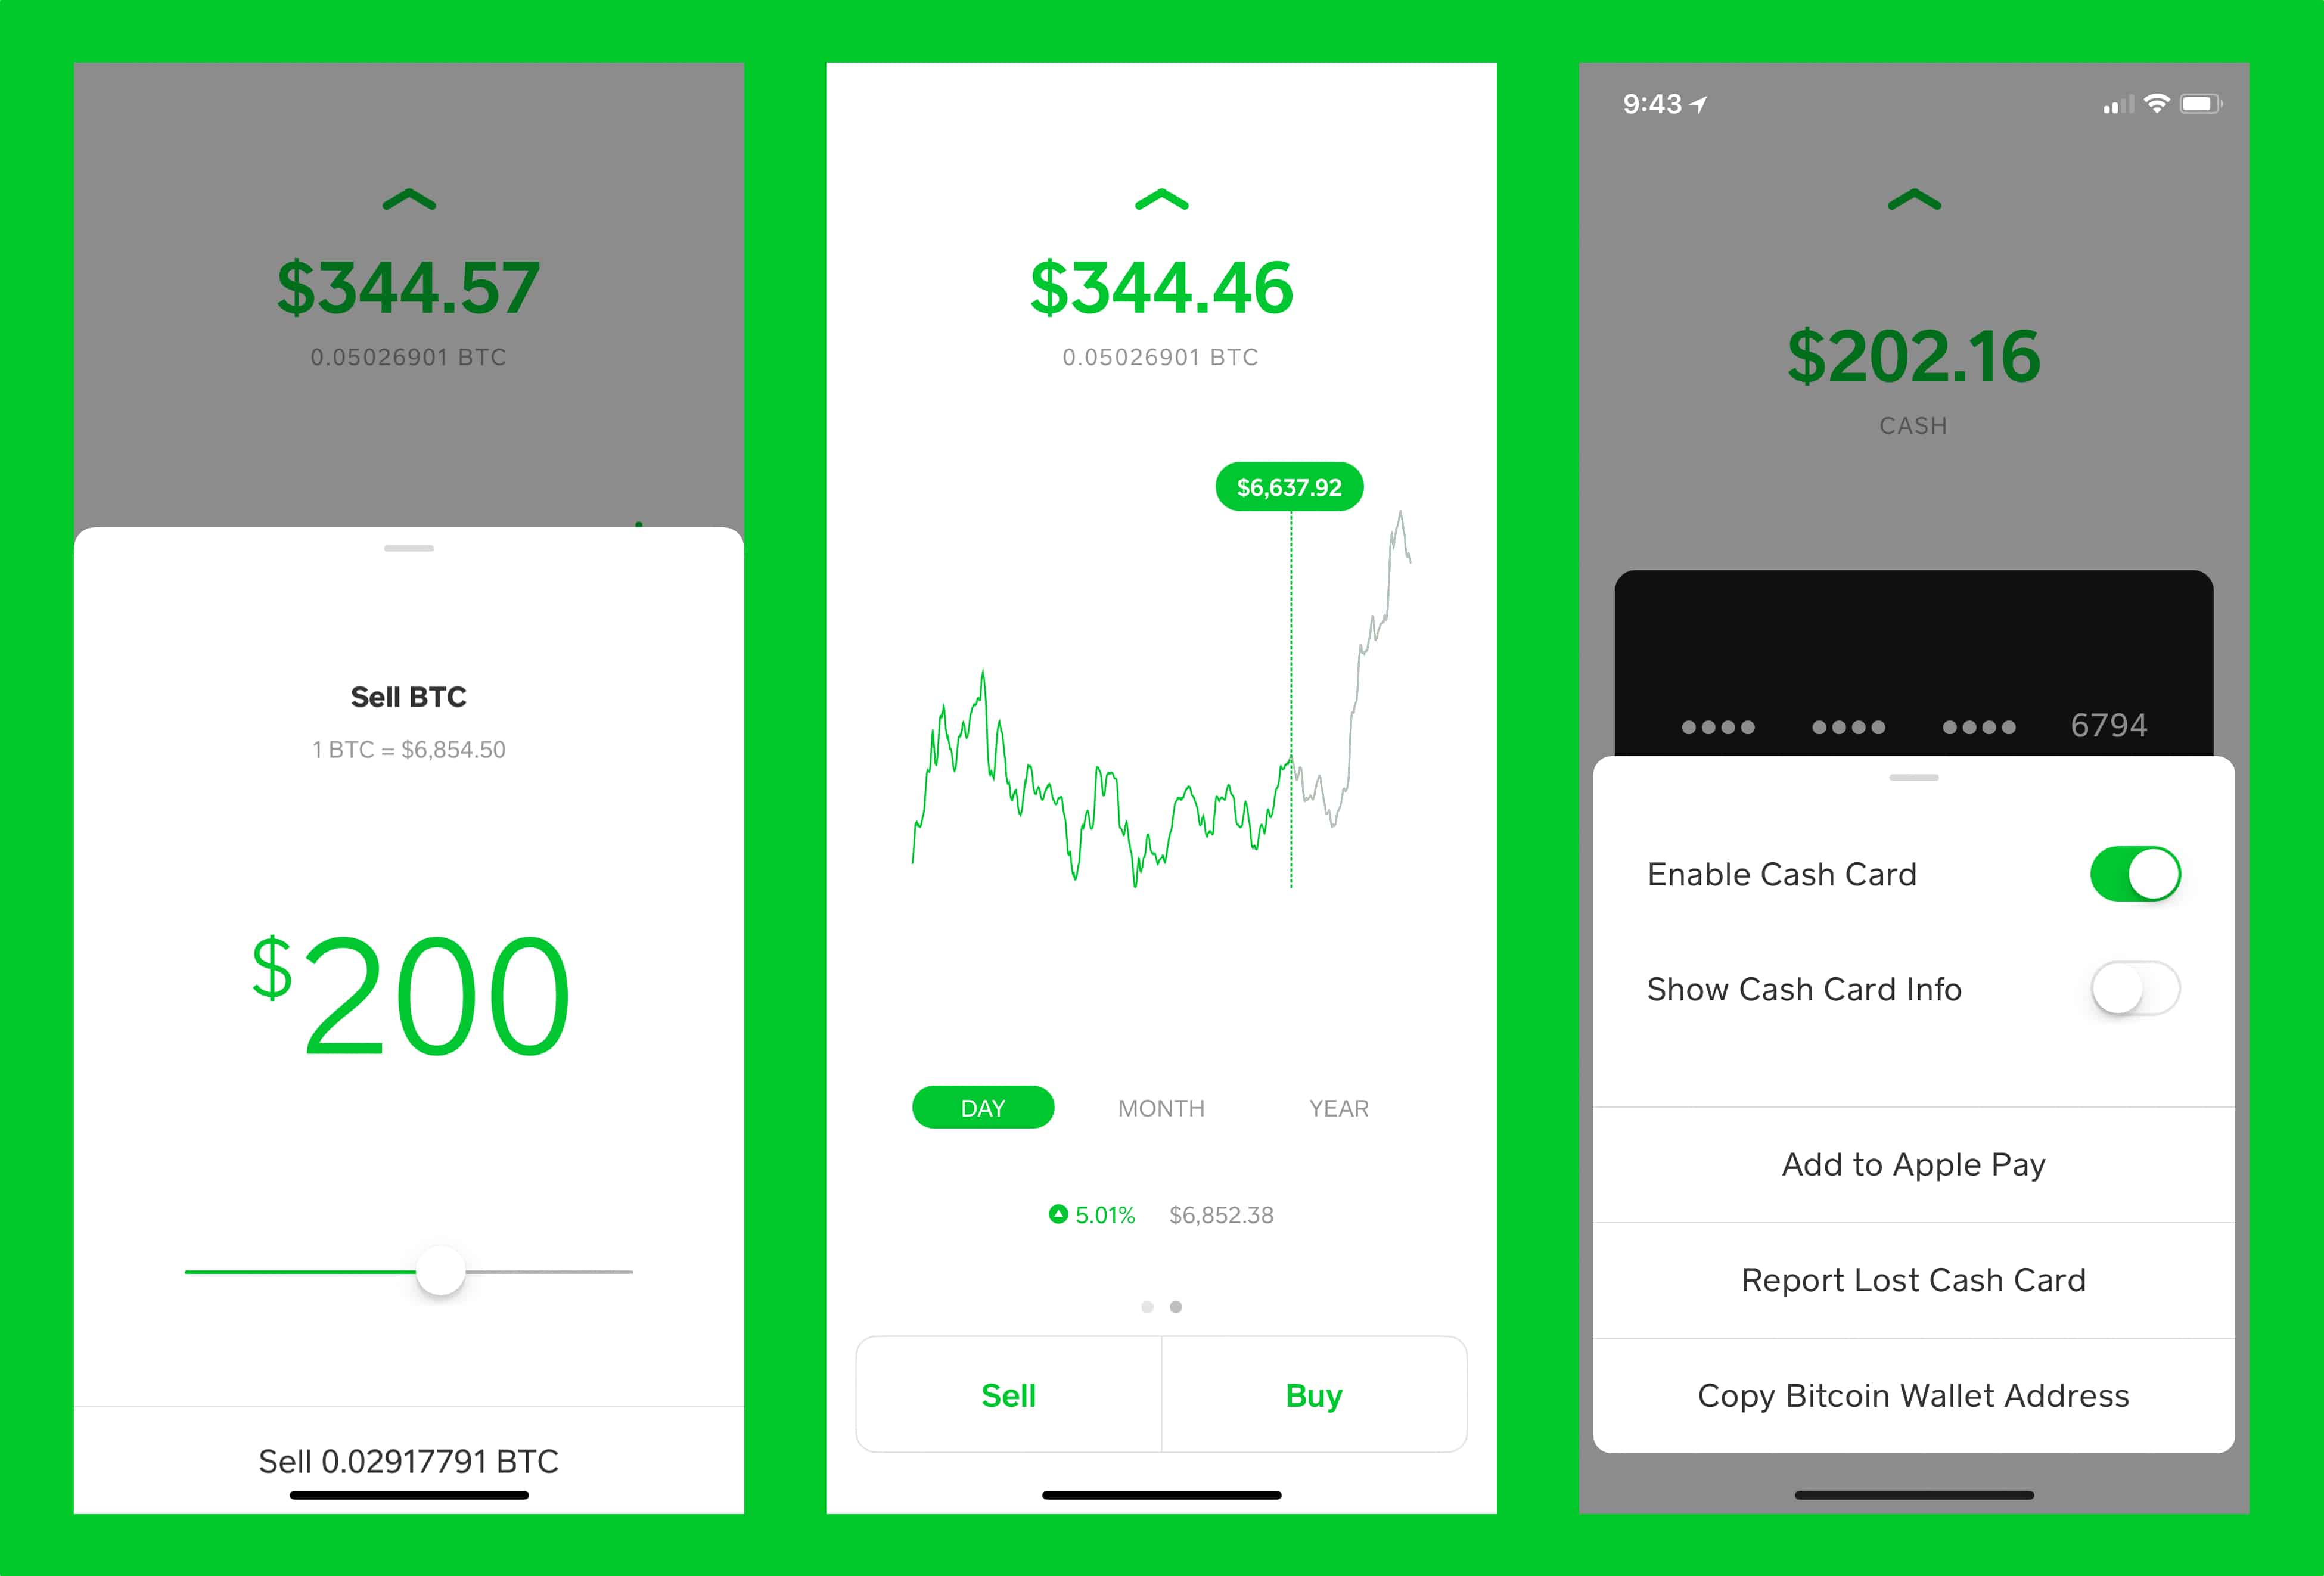 how to move bitcoin to cash app